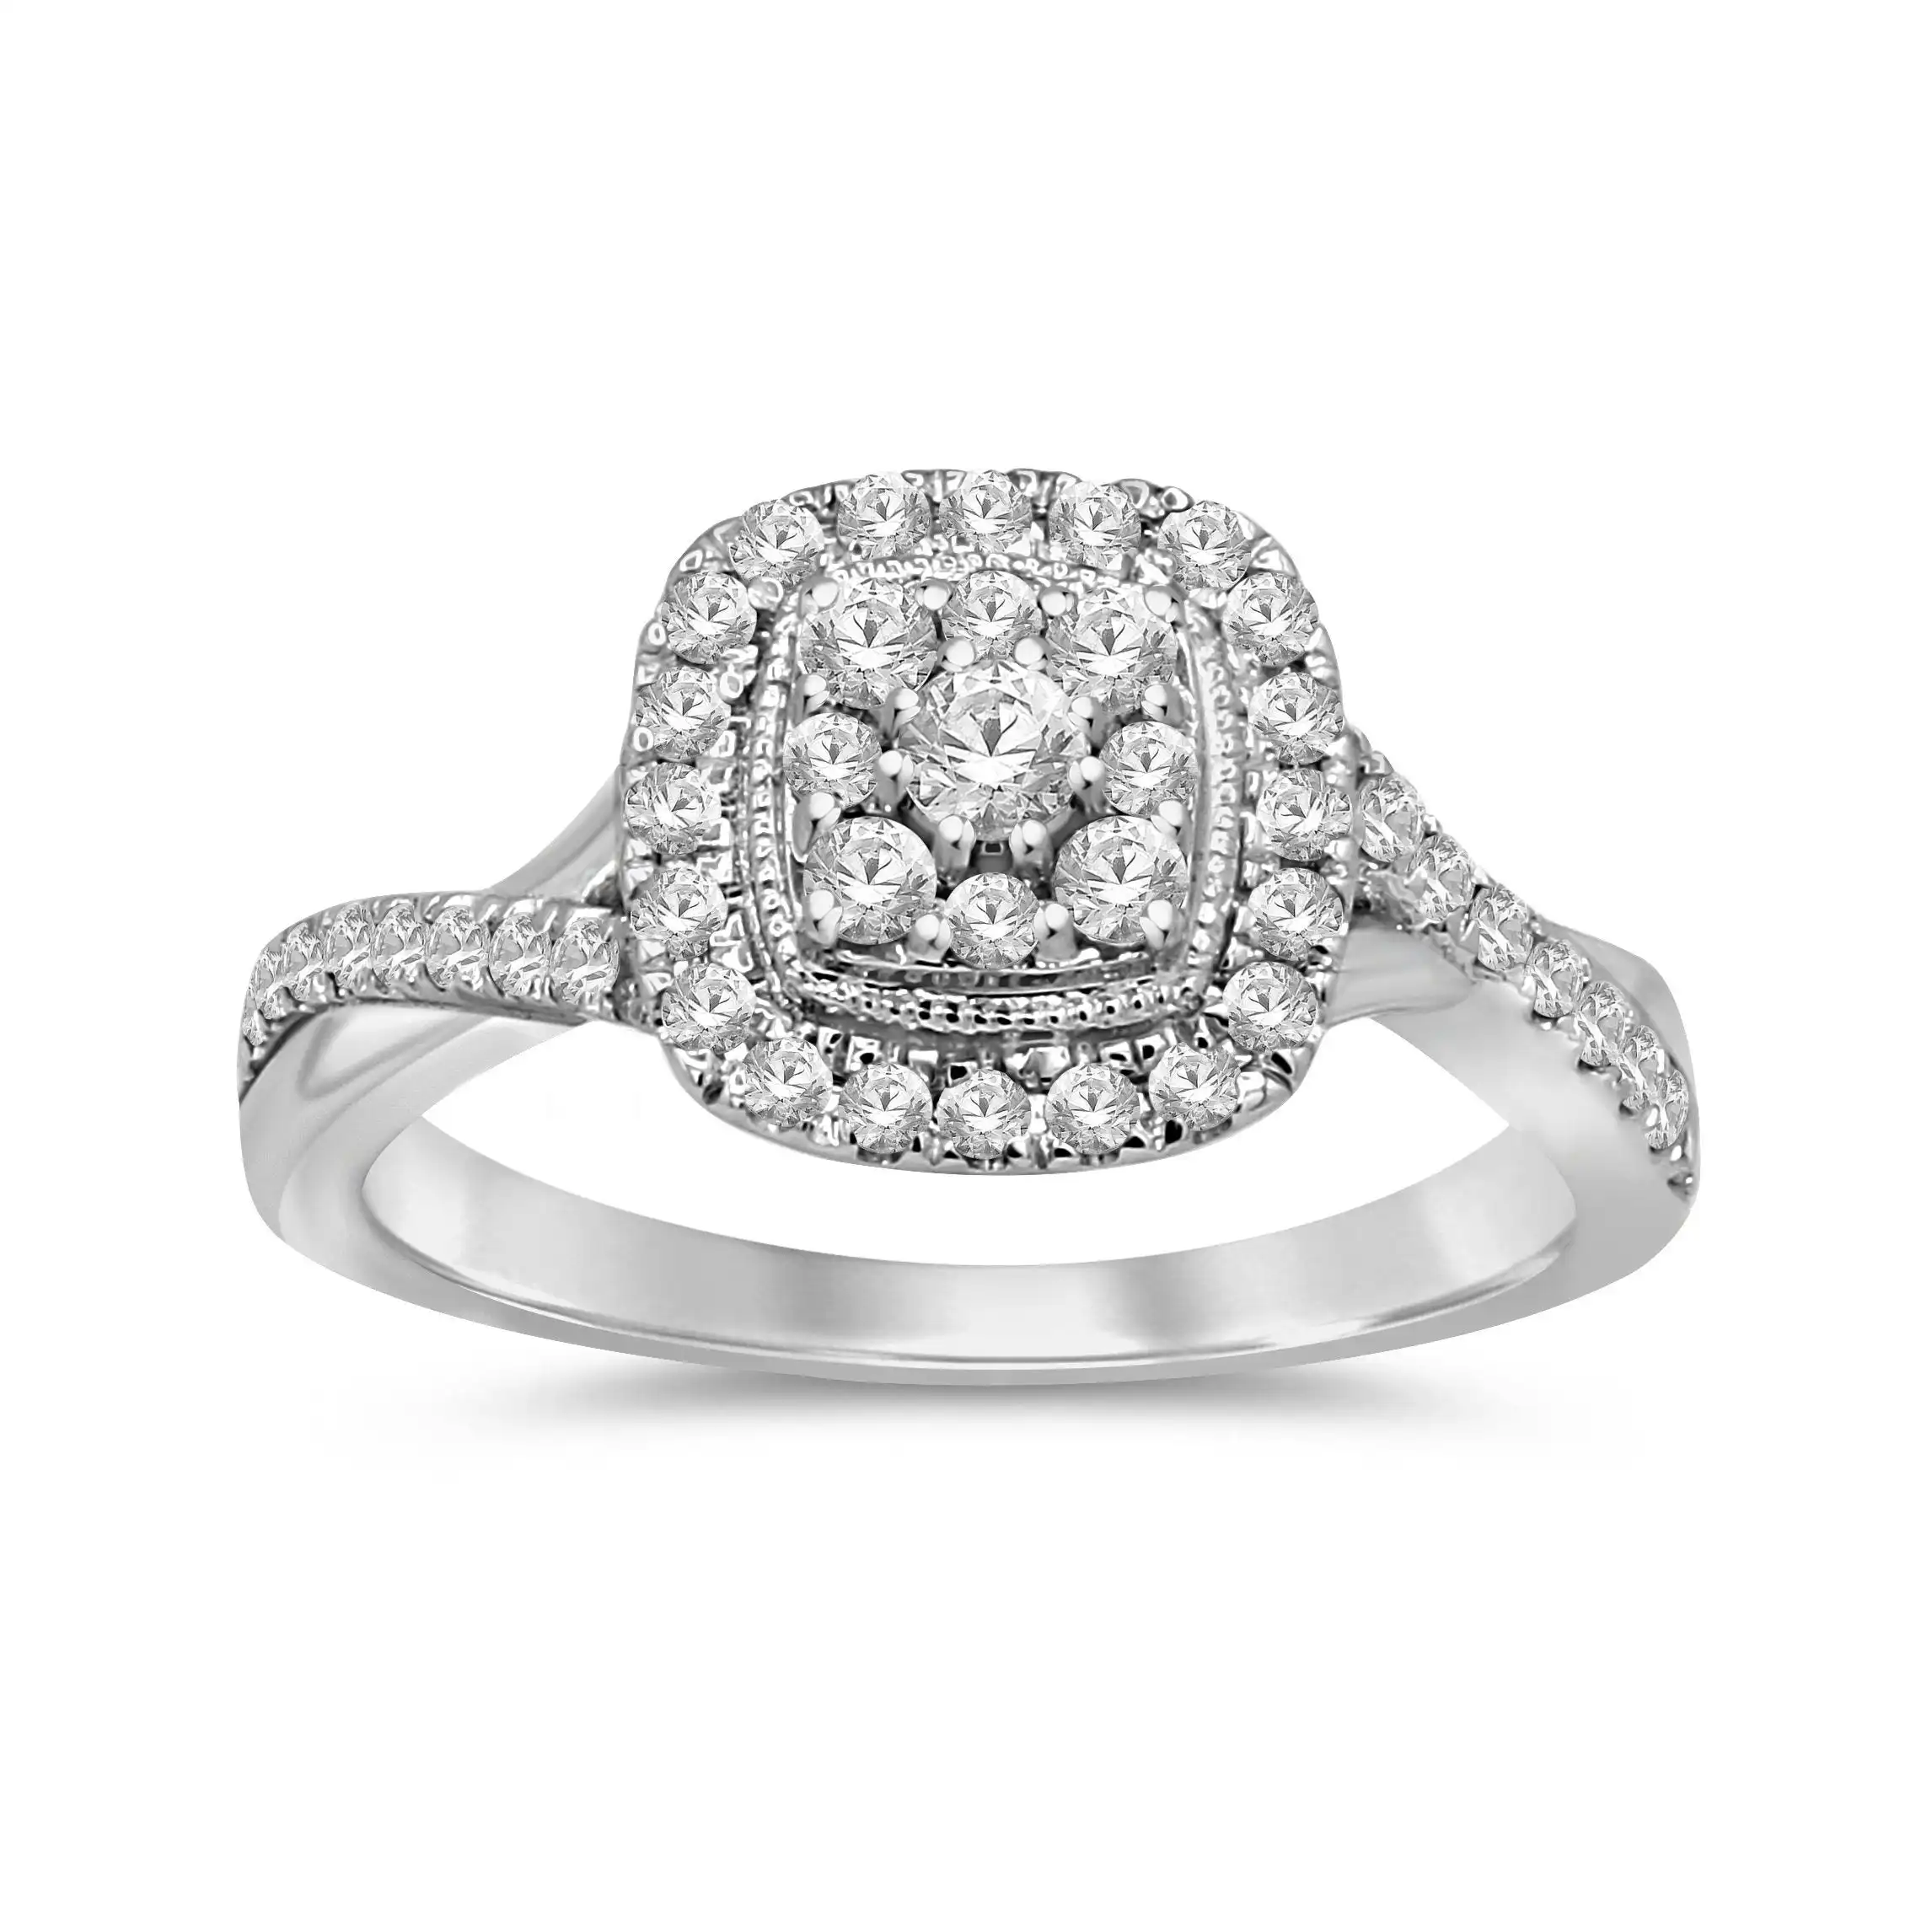 Meera Halo Ring with 1/2ct of Laboratory Grown Diamonds in 9ct White Gold